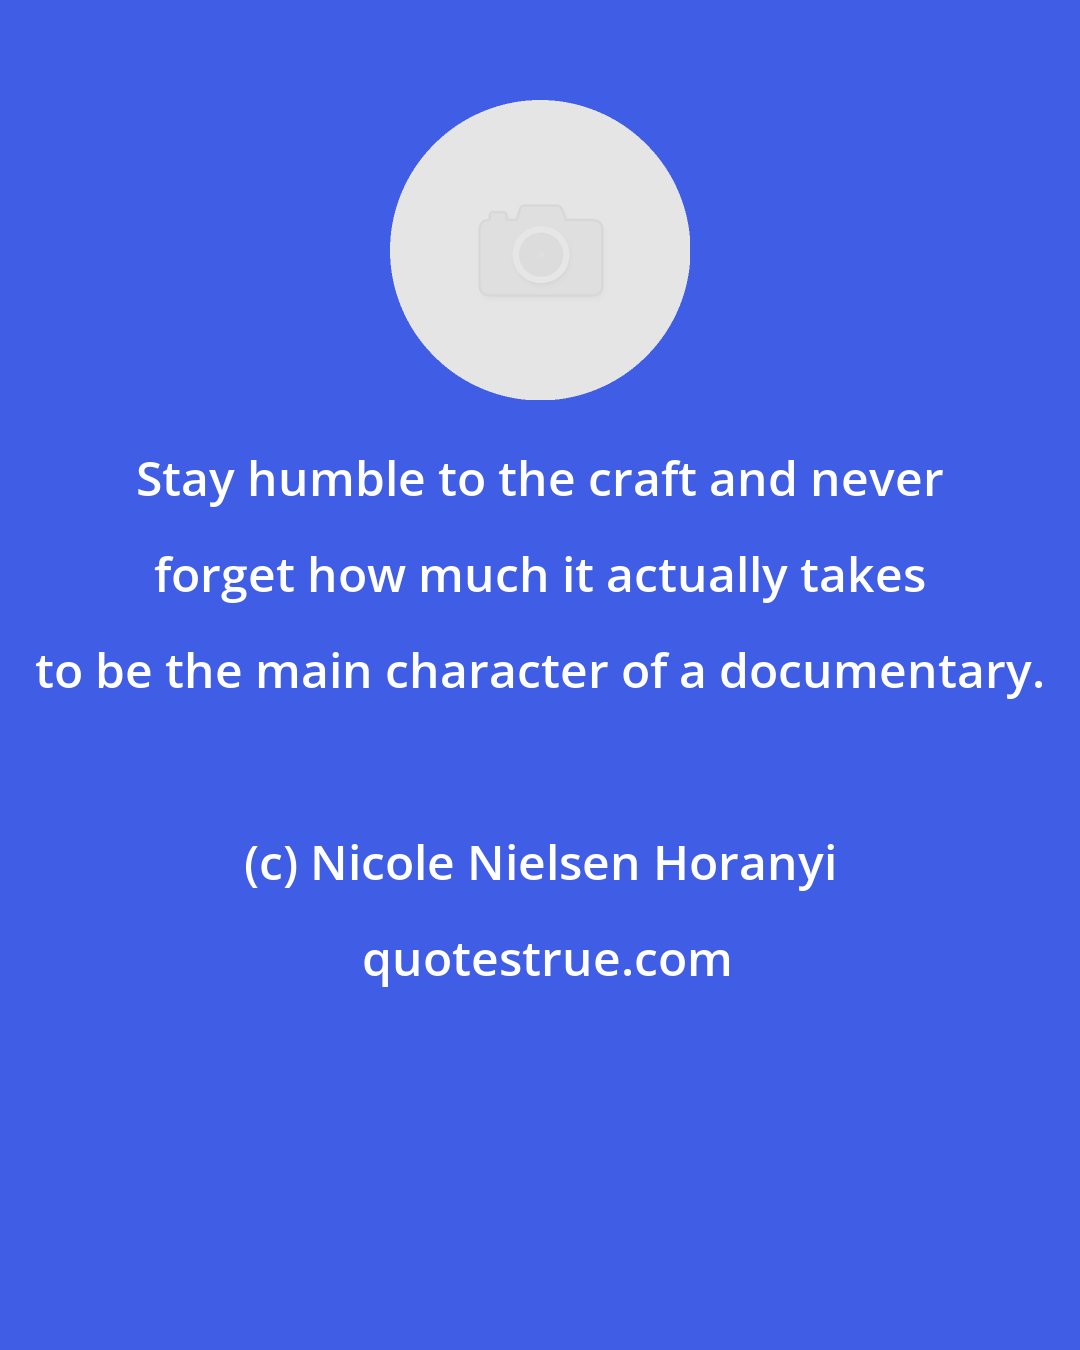 Nicole Nielsen Horanyi: Stay humble to the craft and never forget how much it actually takes to be the main character of a documentary.